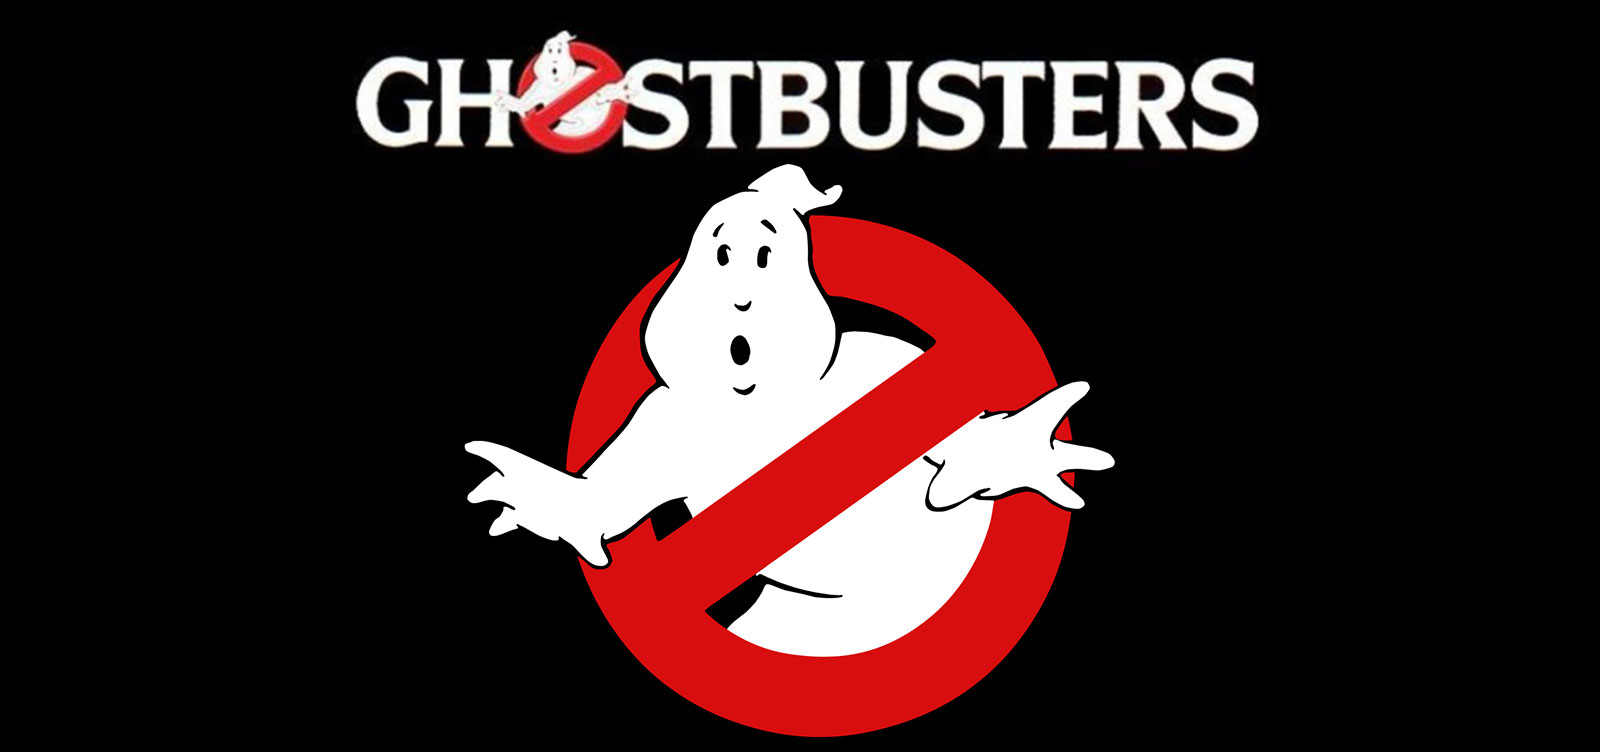 Ghostbusters_News_Images_V01